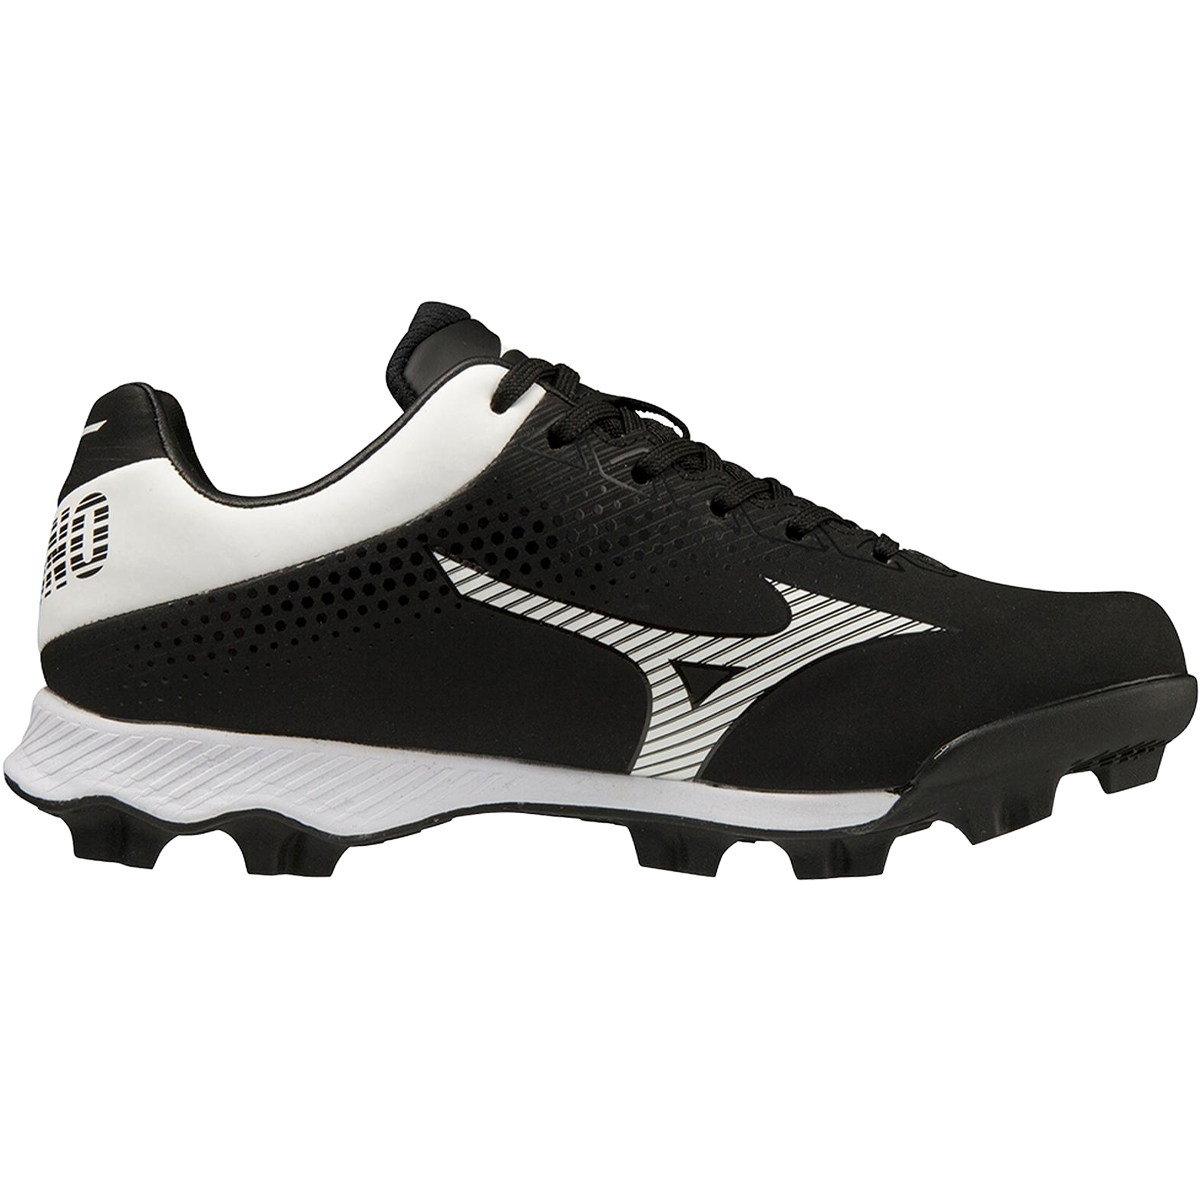 Youth Wave Lightrevo Cleat alternate view